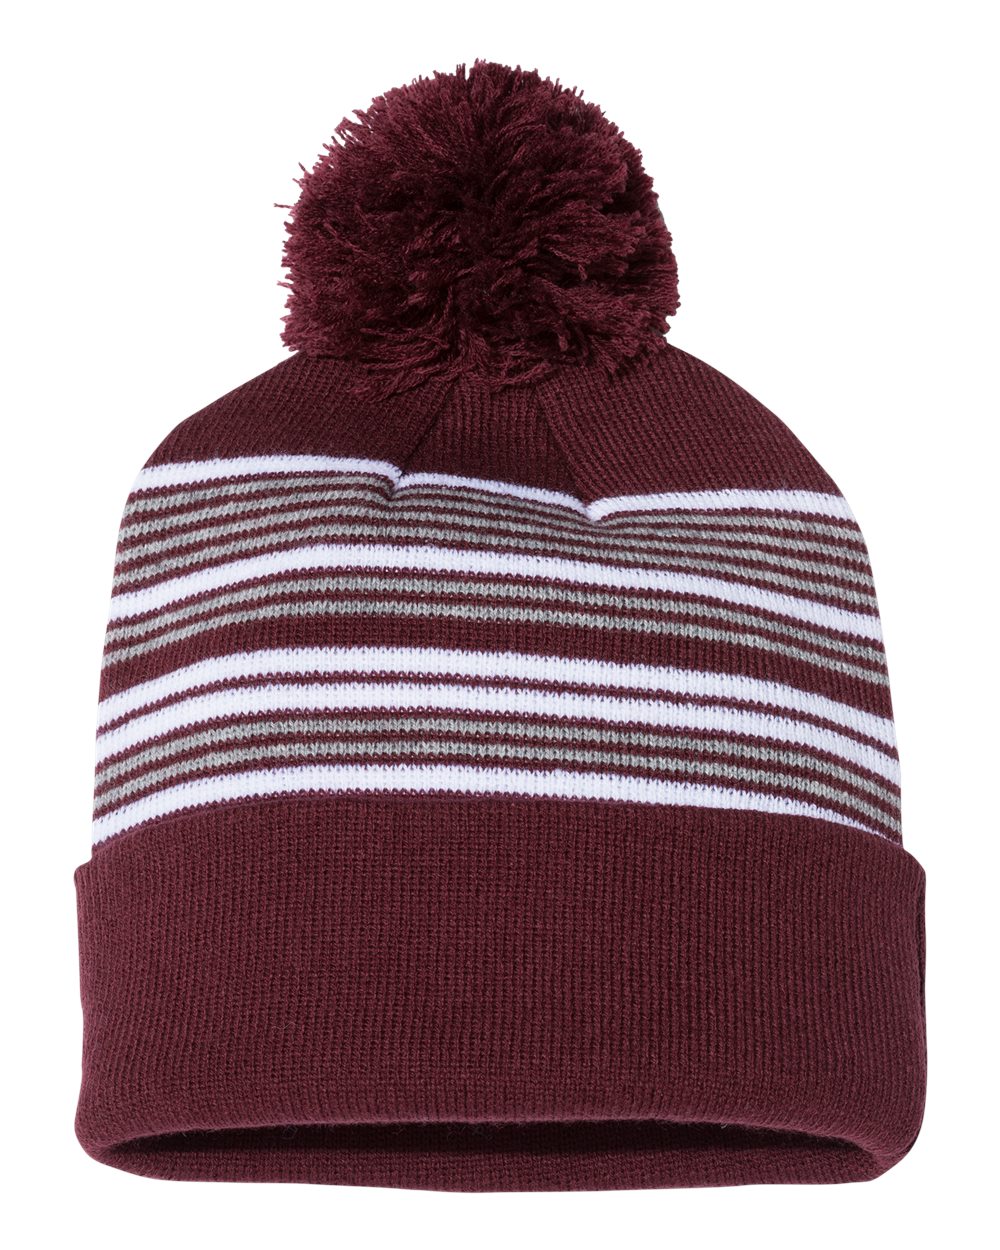 click to view Maroon/ White/ Grey